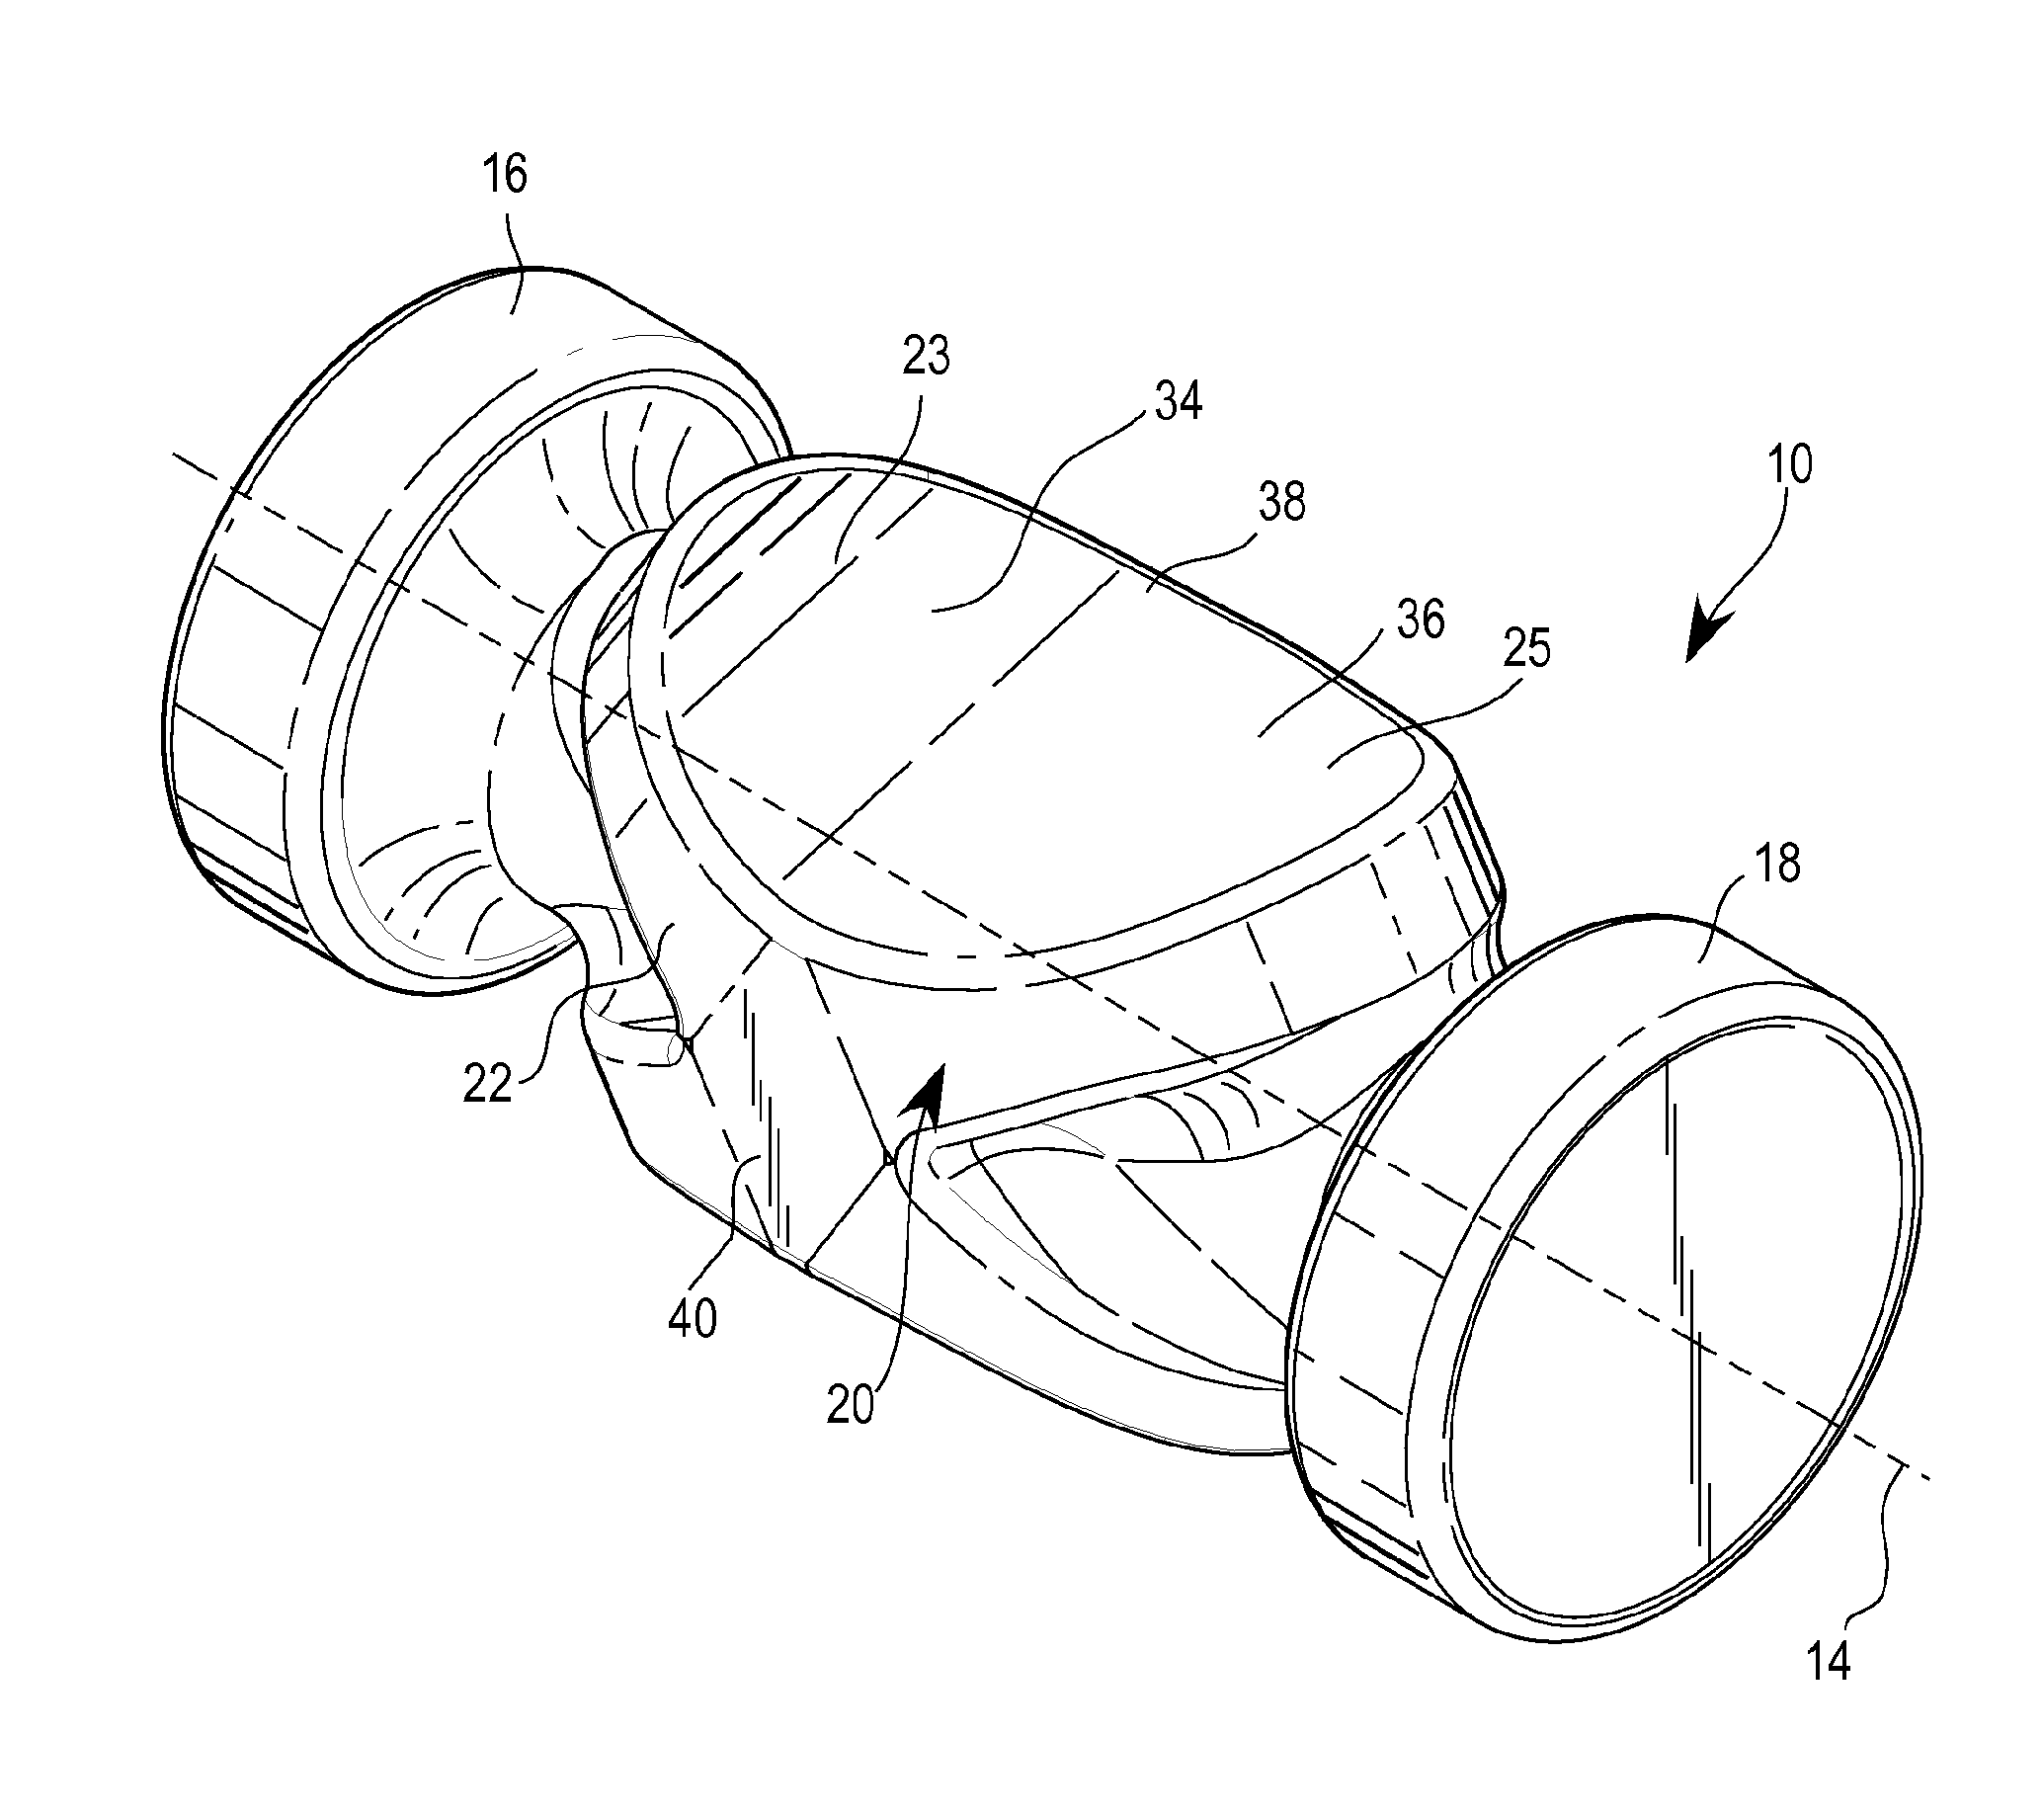 Muscle and tissue therapy device